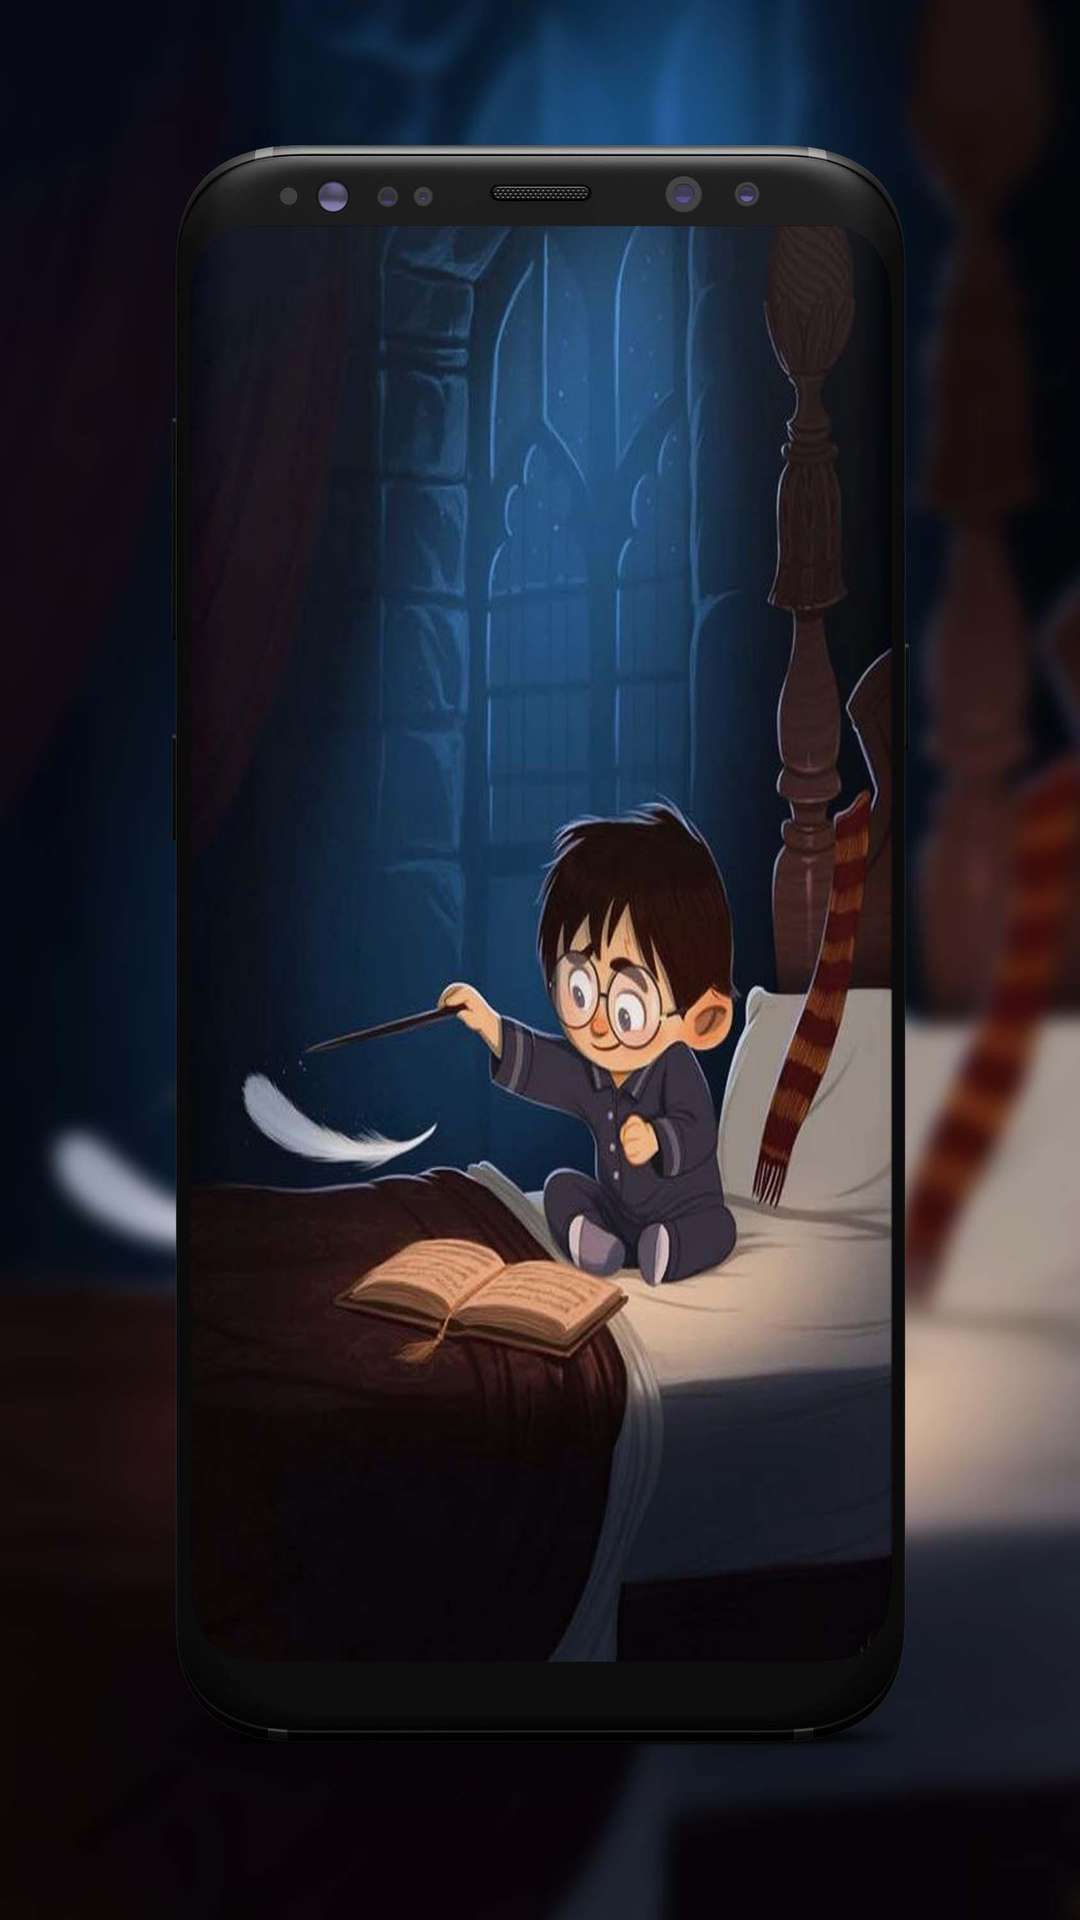 11+ Harry Potter Anime Wallpapers for iPhone and Android by Jessica Castillo